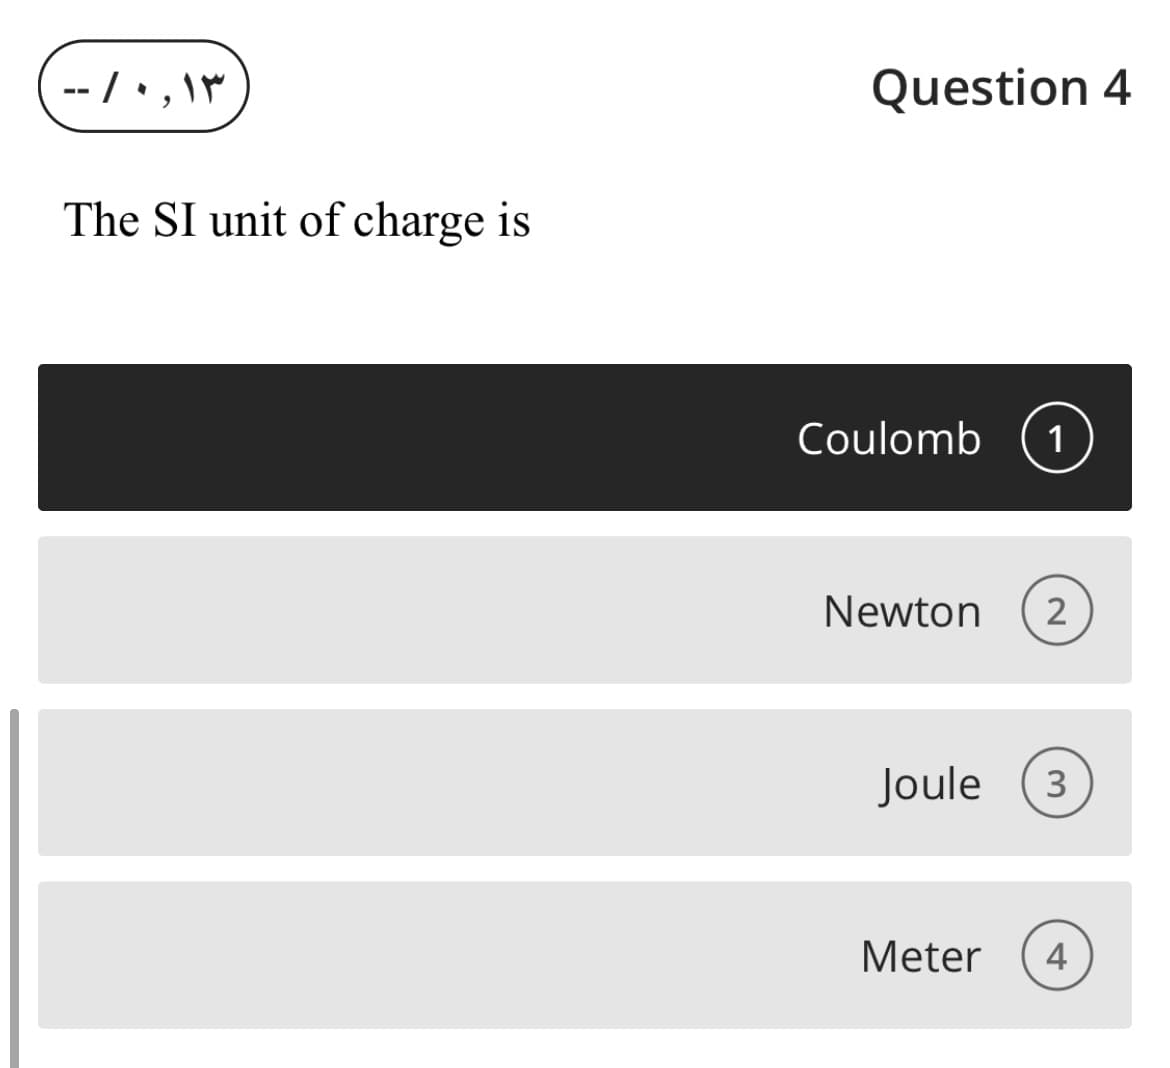 -- /• ,\
Question 4
The SI unit of charge is
Coulomb
1
Newton
2
Joule
3
Meter
4
